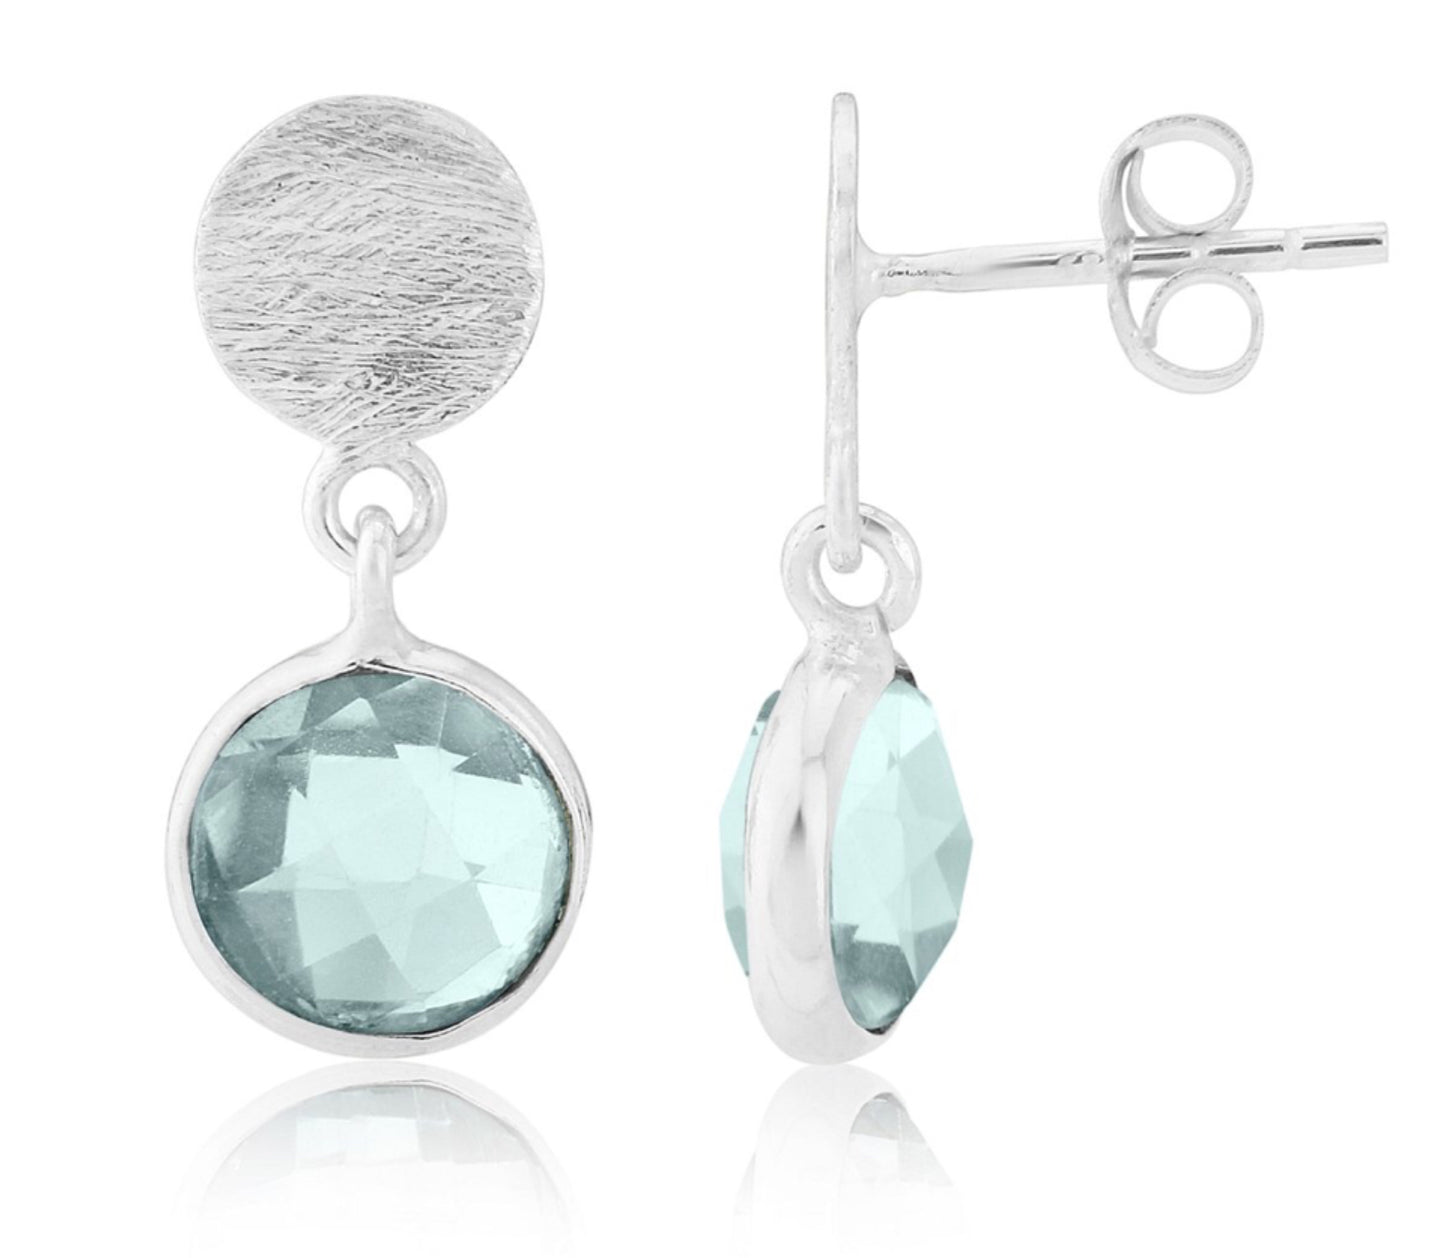 blue topaz and sterling silver earrings